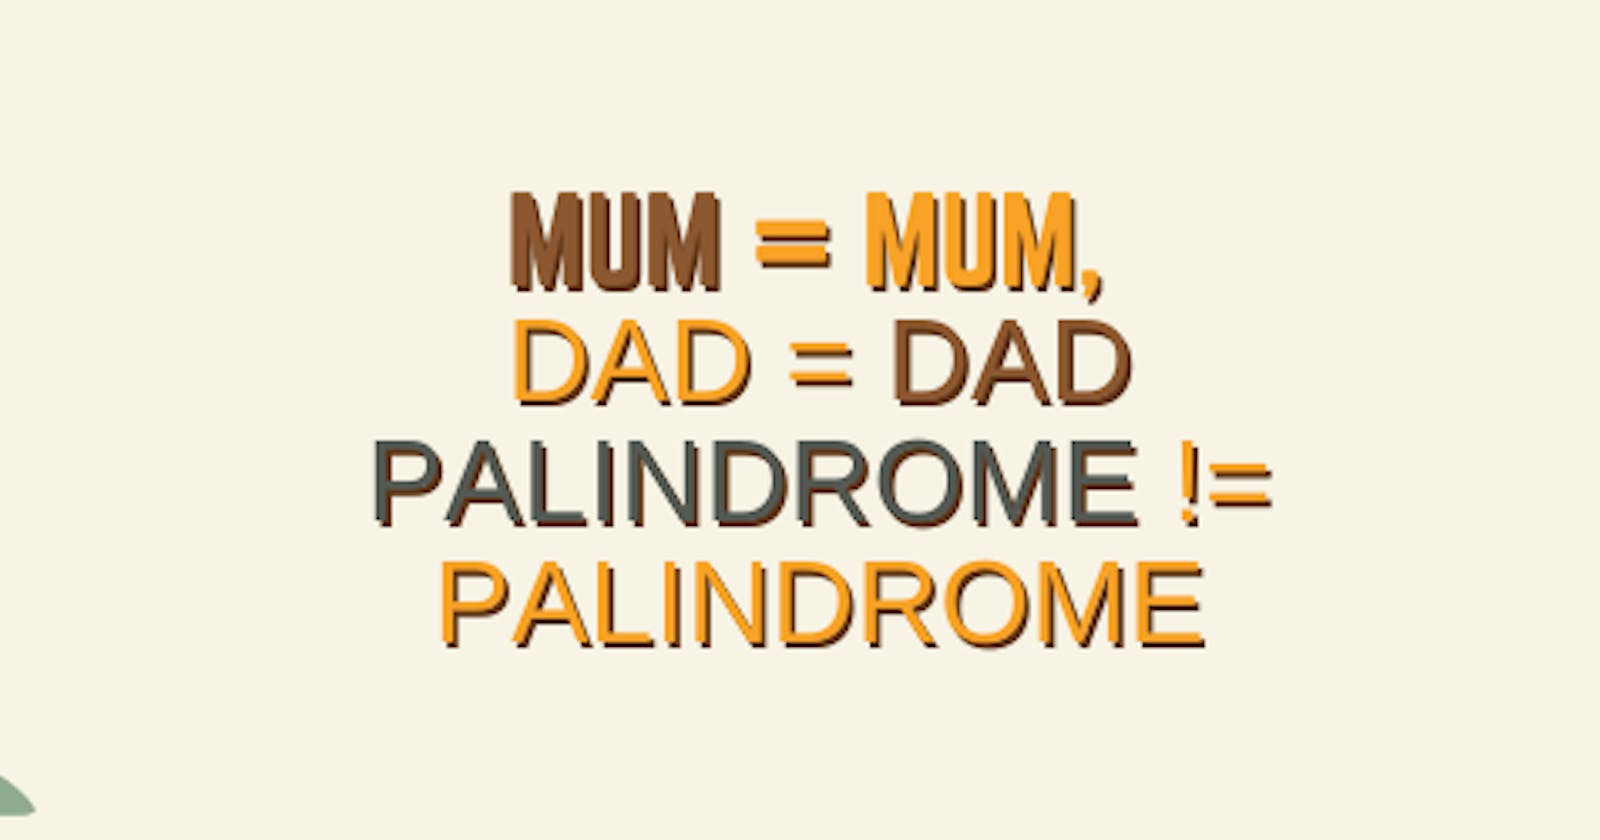 How to Check For Palindrome in JavaScript